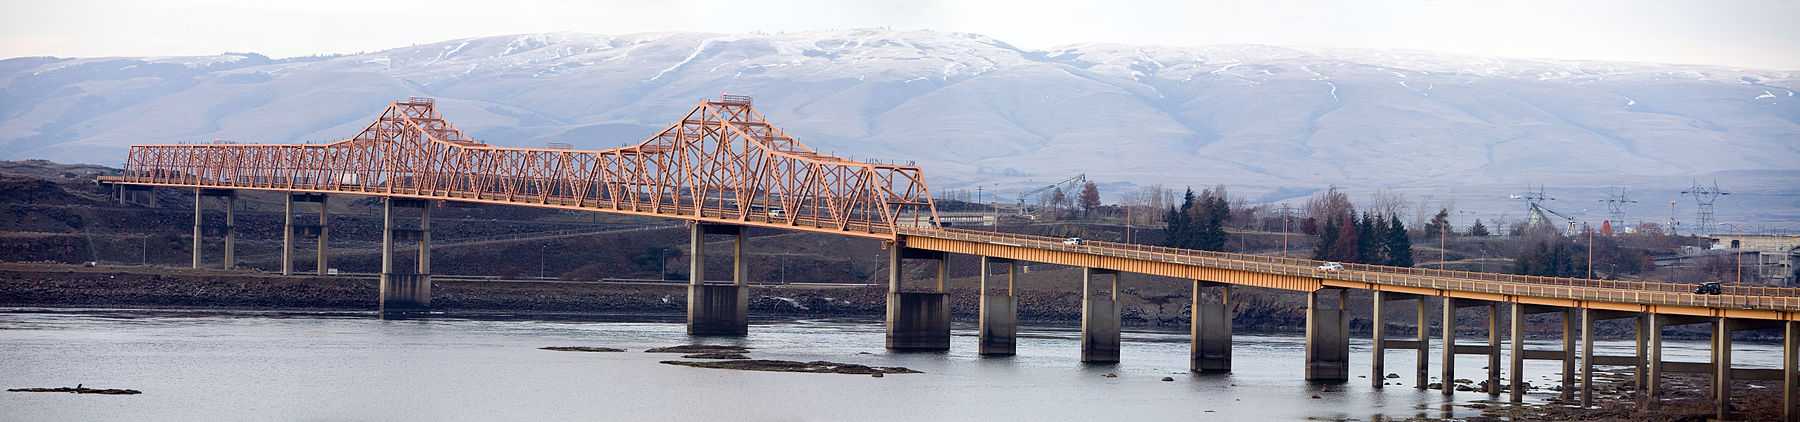 The Dalles Bridge as very wide image